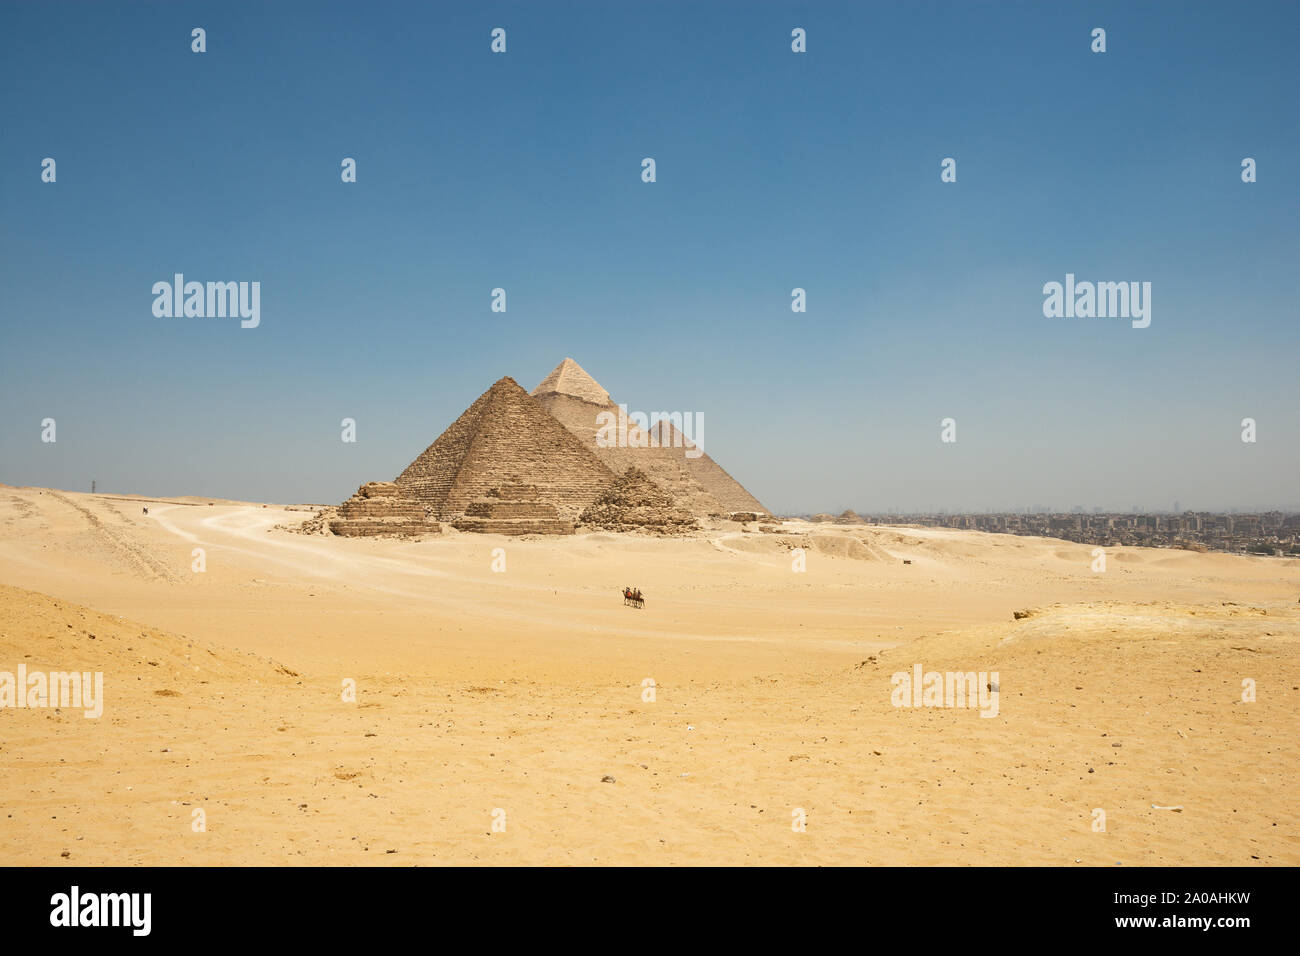 The Giza pyramid complex, also called the Giza Necropolis on the Giza Plateau in Egypt that includes the Great Pyramid of Giza, the Pyramid of Khafre, Stock Photo